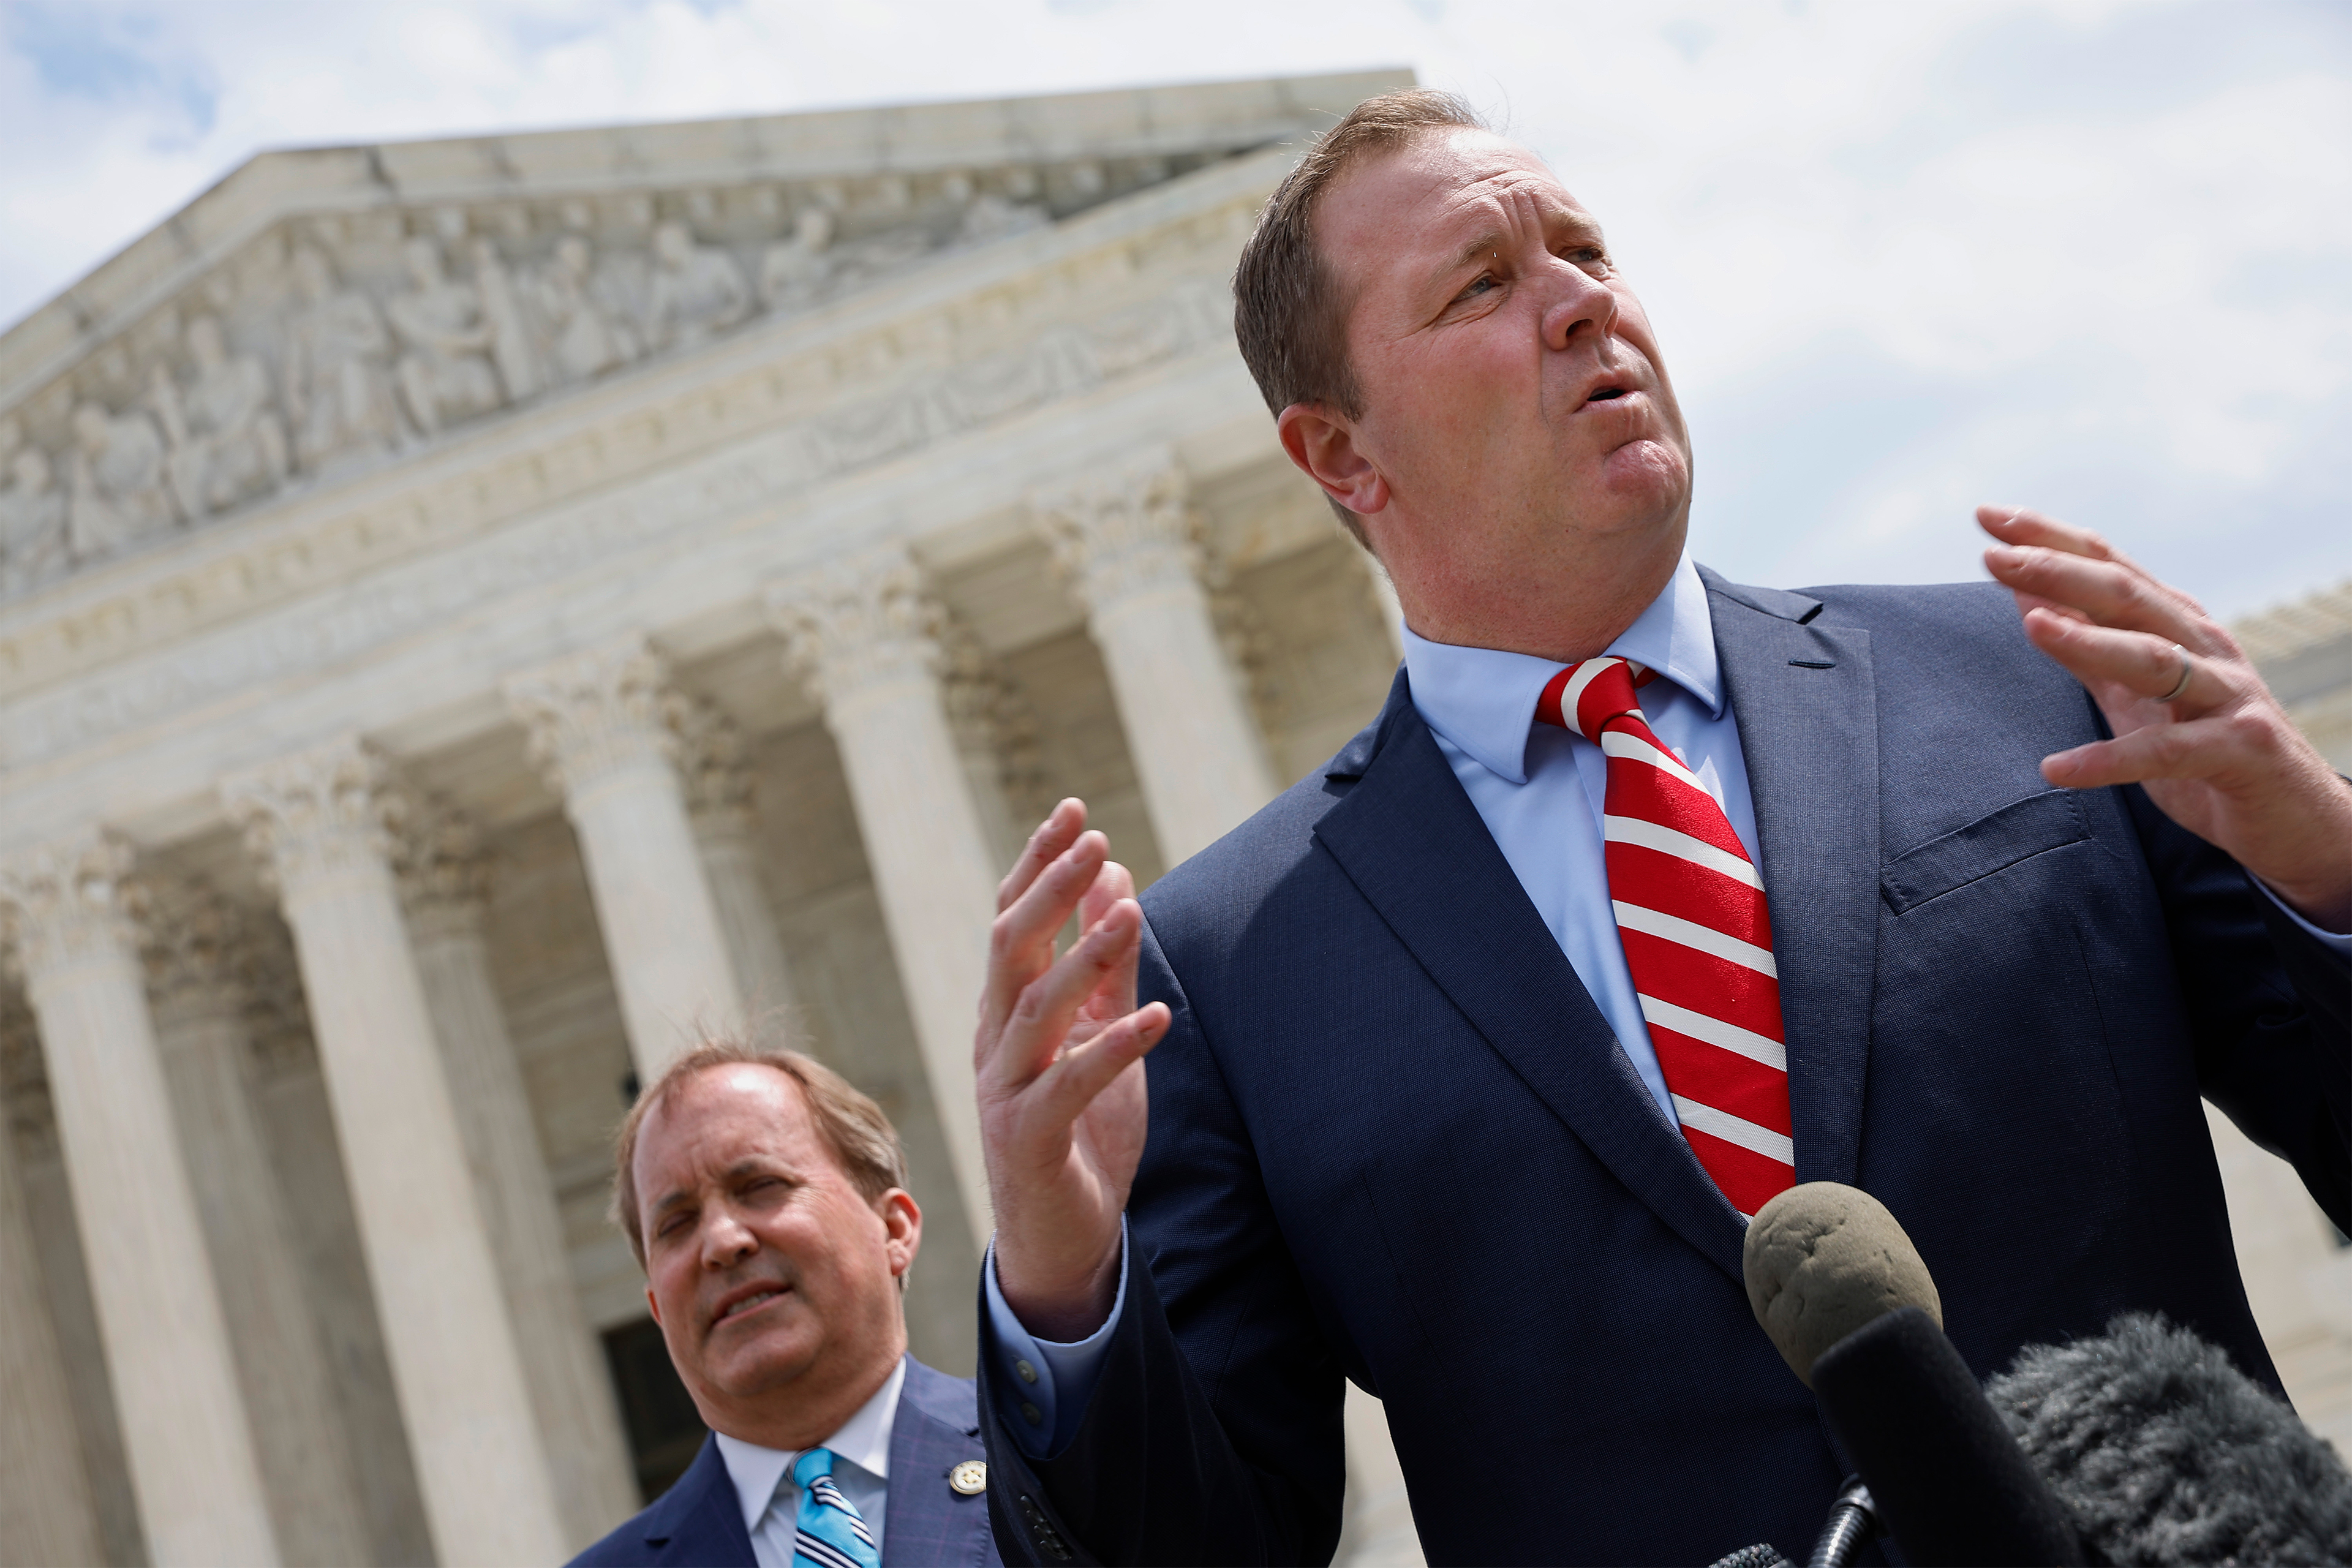 A photo shows Eric Schmitt speaking to reporters in front of the U.S. Supreme Court.